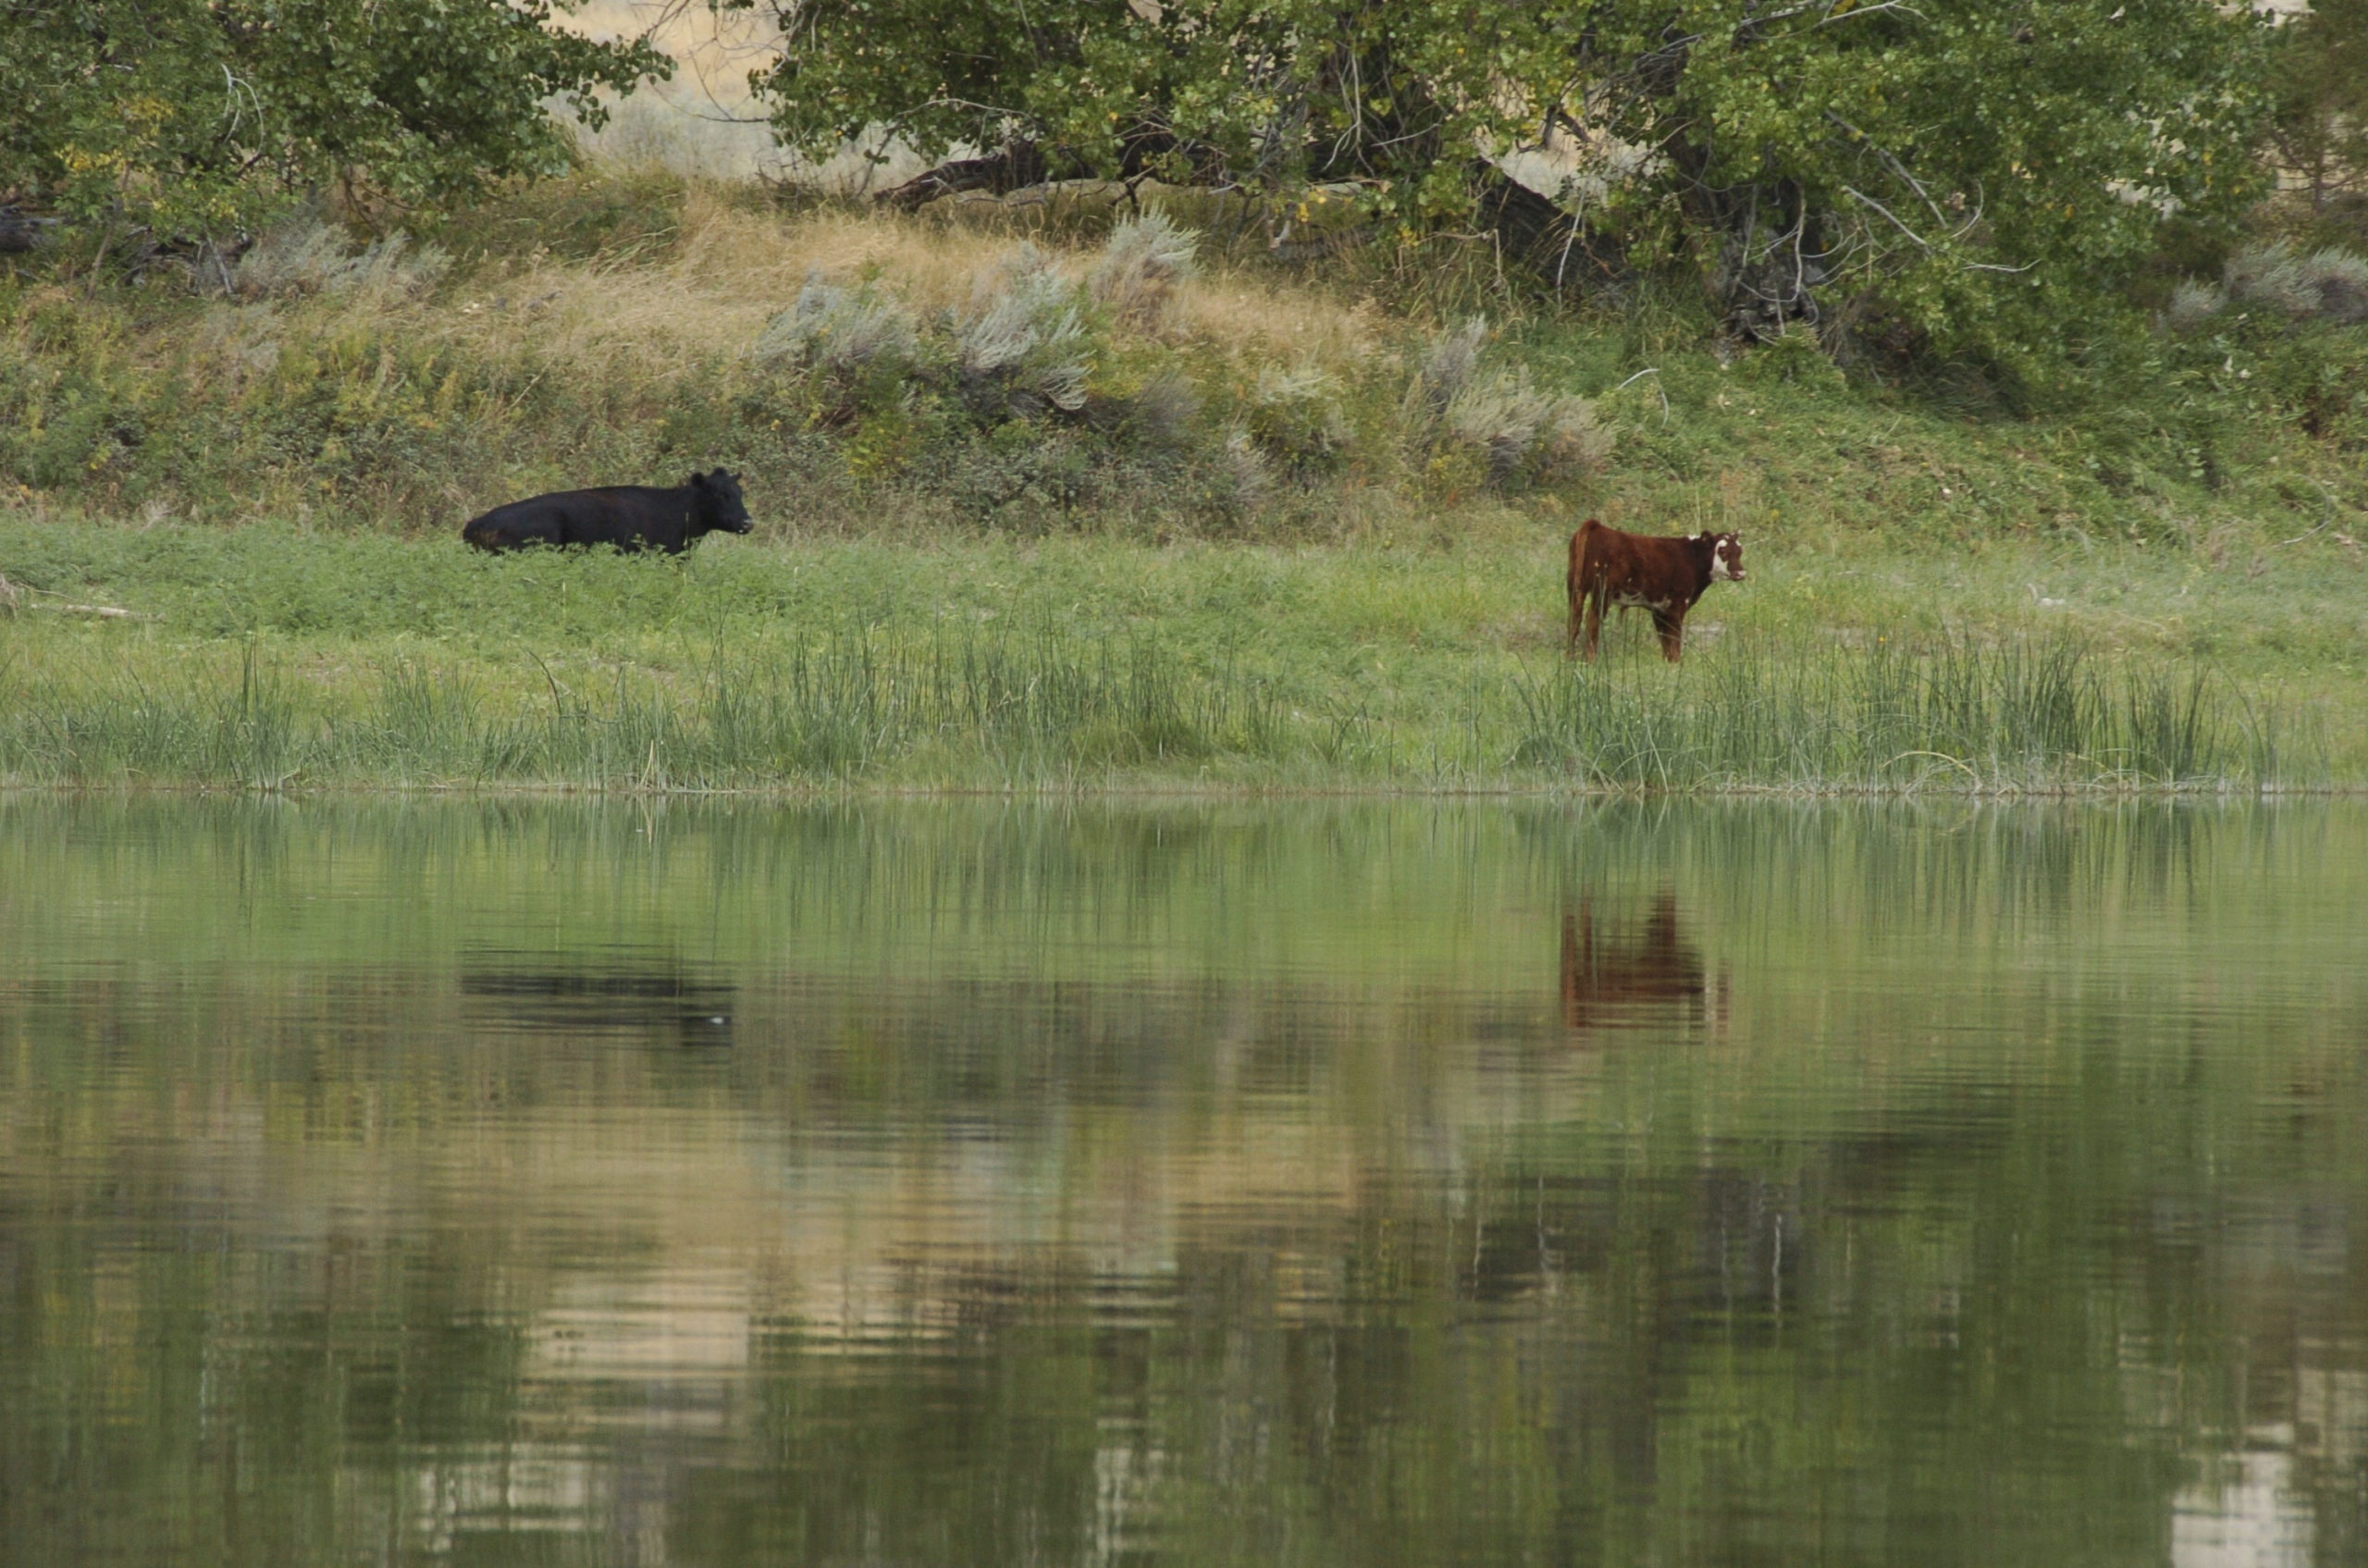 A September 2011 file photo shows cattle grazing along a section of the Missouri River that includes the Upper Missouri River Breaks National Monument near Fort Benton, Montana.